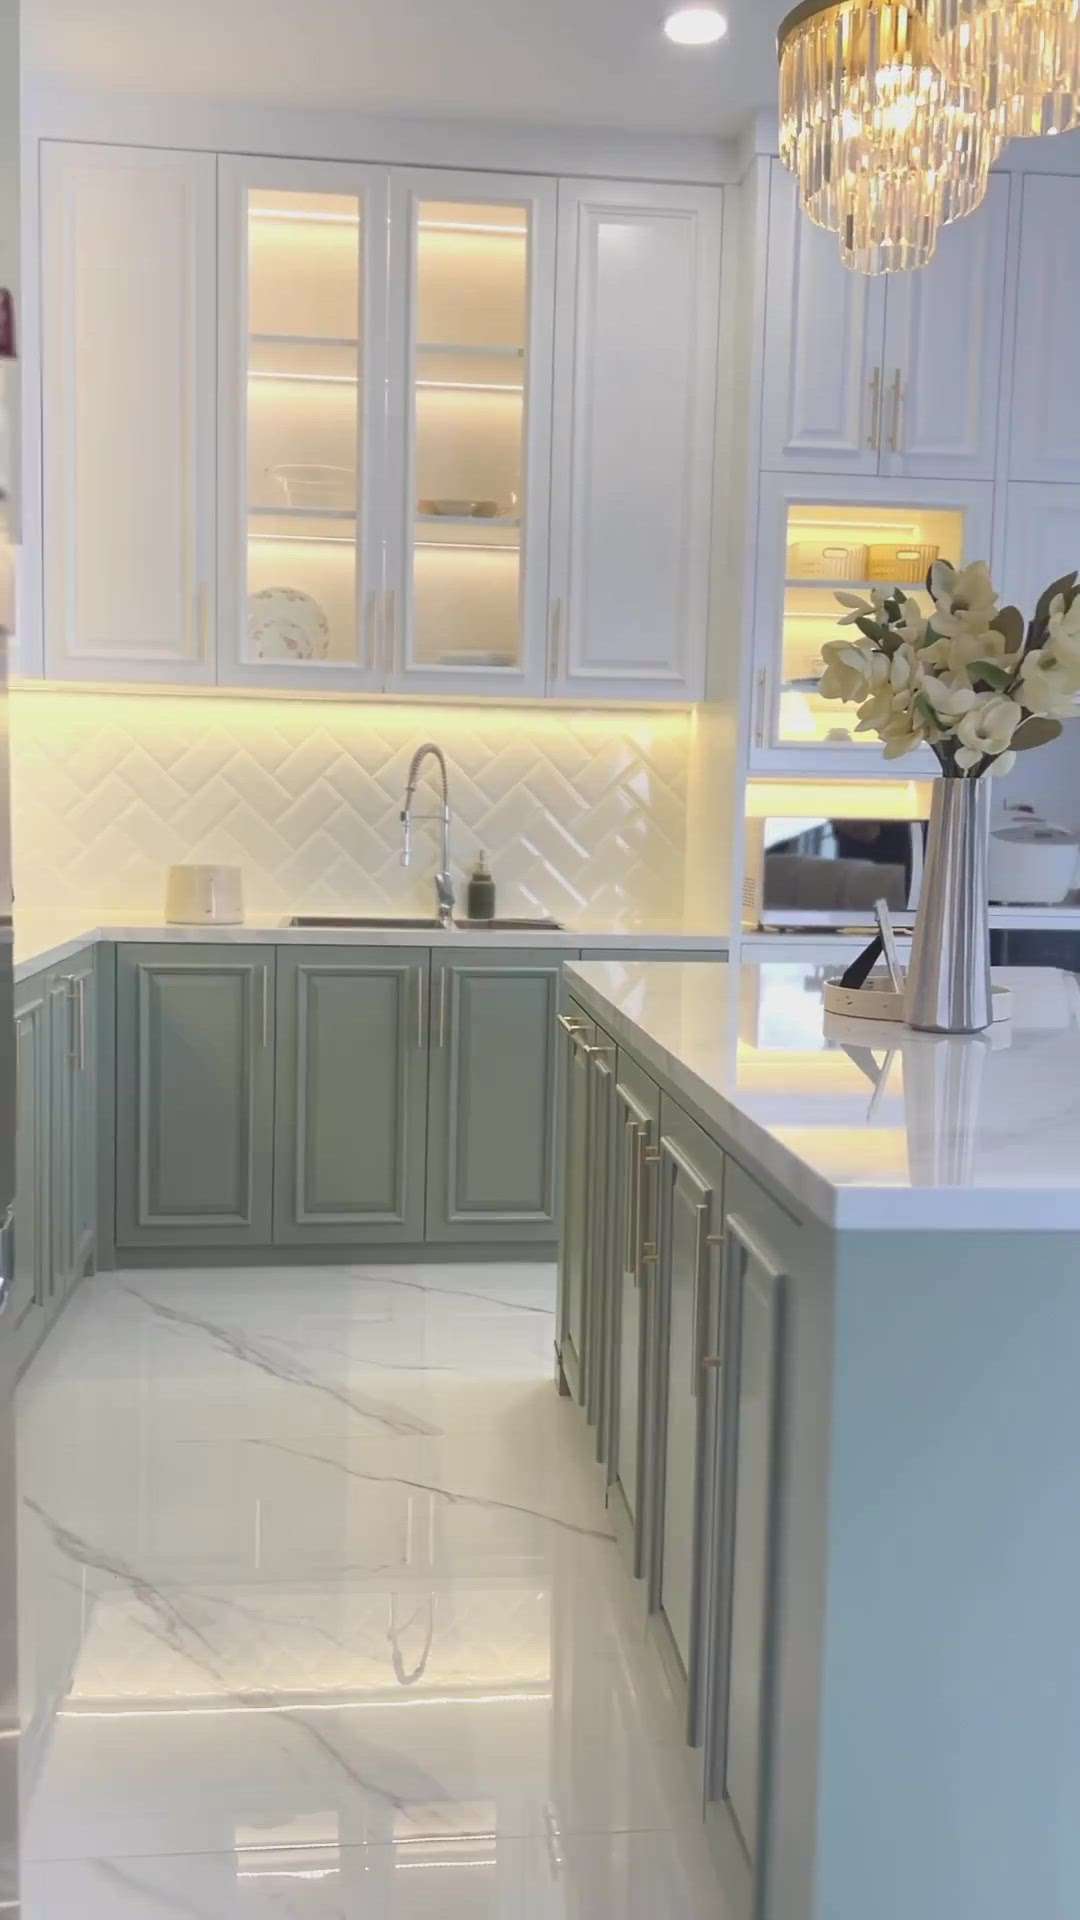 A beautiful kitchen inspiration for you in bright colours. Did you like it? 

Royal Oak Projects specialize in luxury interior design projects in Indore and surrounding cities. Message us for free consultation and designing custom interiors for your home or office. 

___________
#home #homesweethome #homedecor #homedesign #homeinterior #architecture #builder #interiordesign #design #luxury #luxuryhomes #housedesign #interior #construction  #homeinspiration #homestyle #homes #realestate #koloapp  #livingroom #livingroomdecor #bedroomdesign #bedroom #pool #indore #india #indorecity #madhyapradesh #mp #indori #indoregram